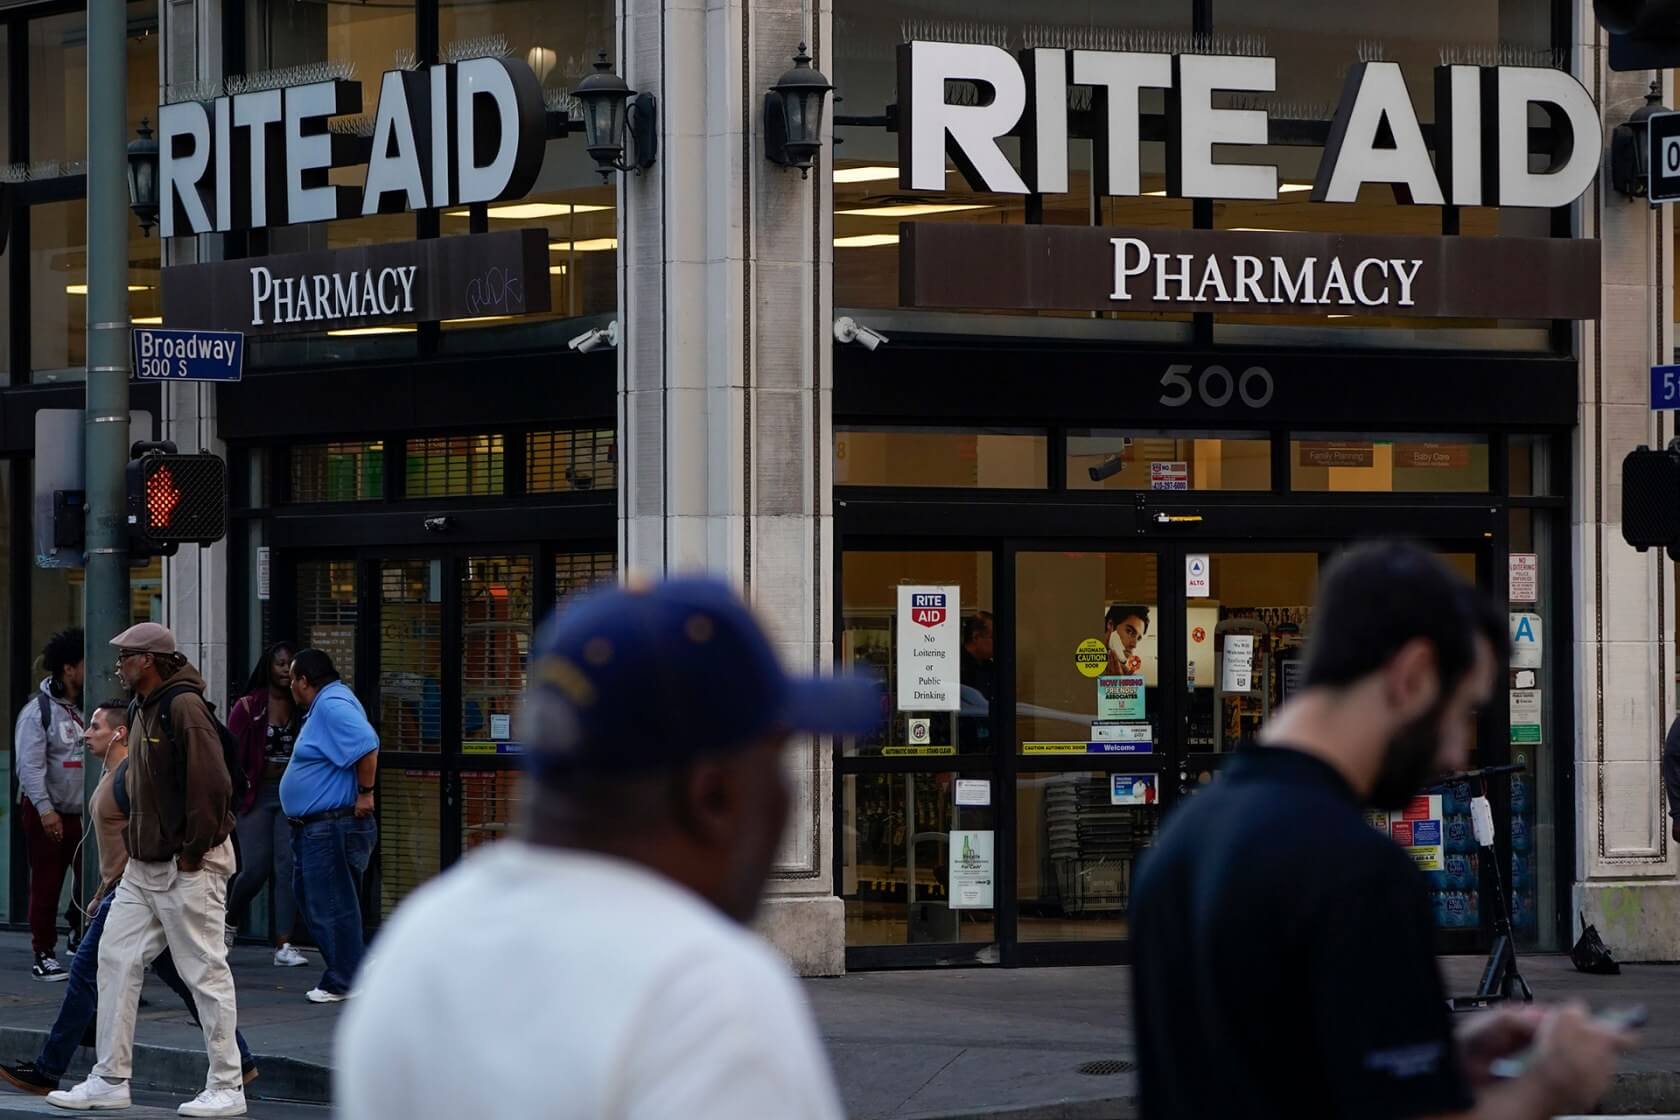 Rite Aid has been using facial recognition tech across hundreds of its stores